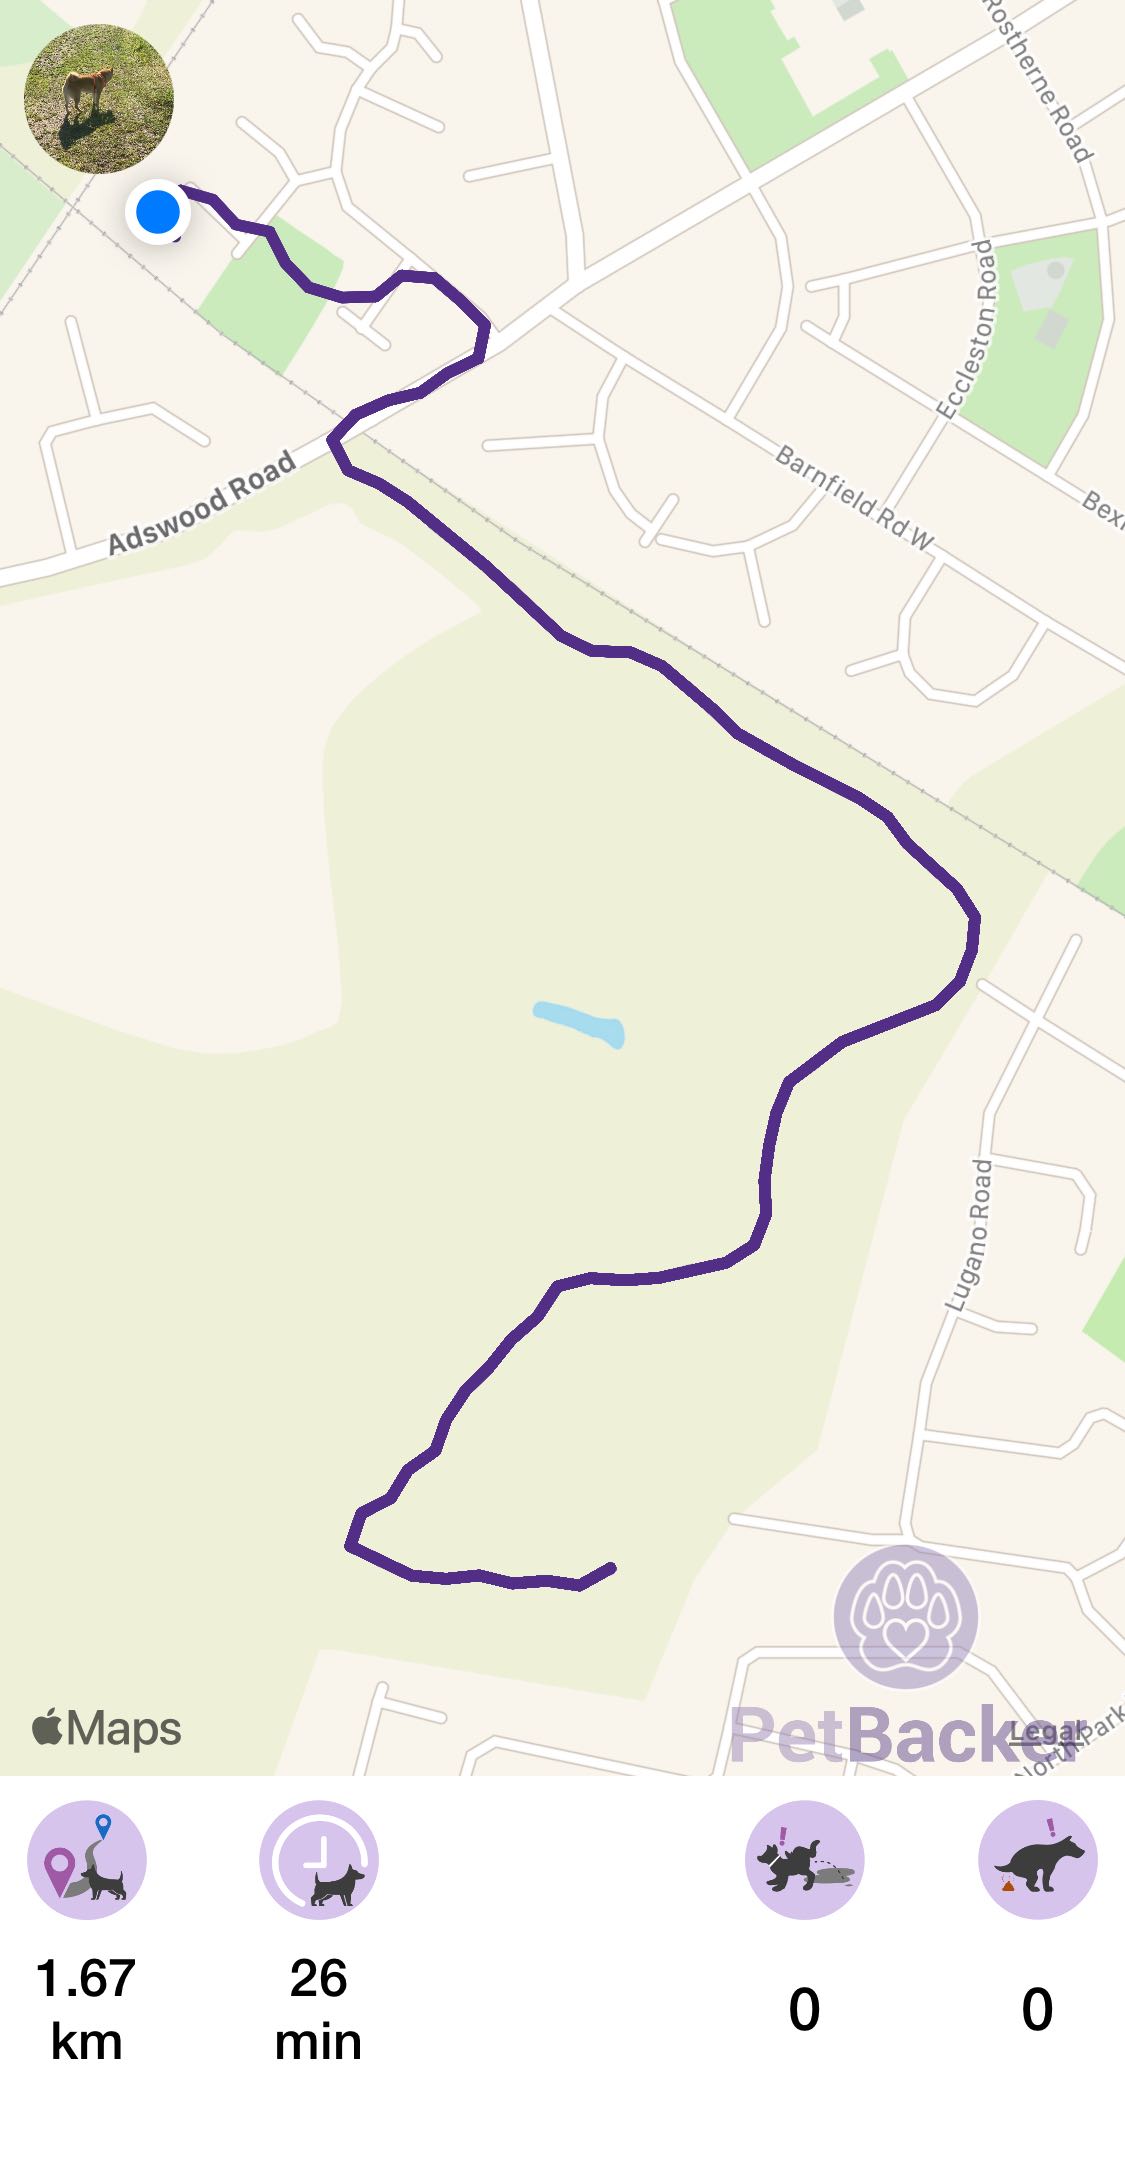 Just completed pet walking of 1.67 km